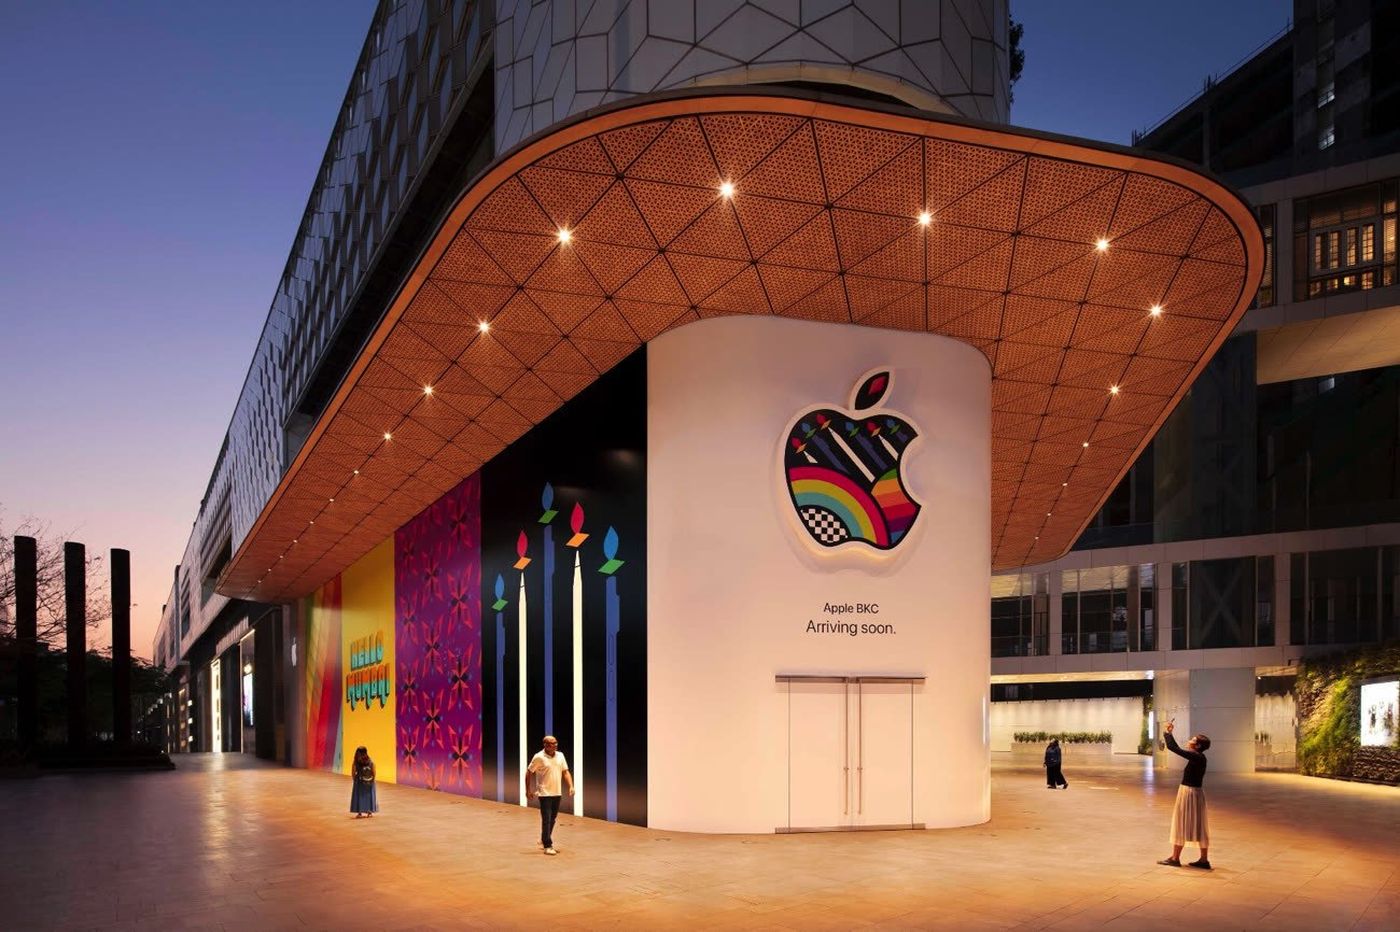 India’s first Apple Store opening date